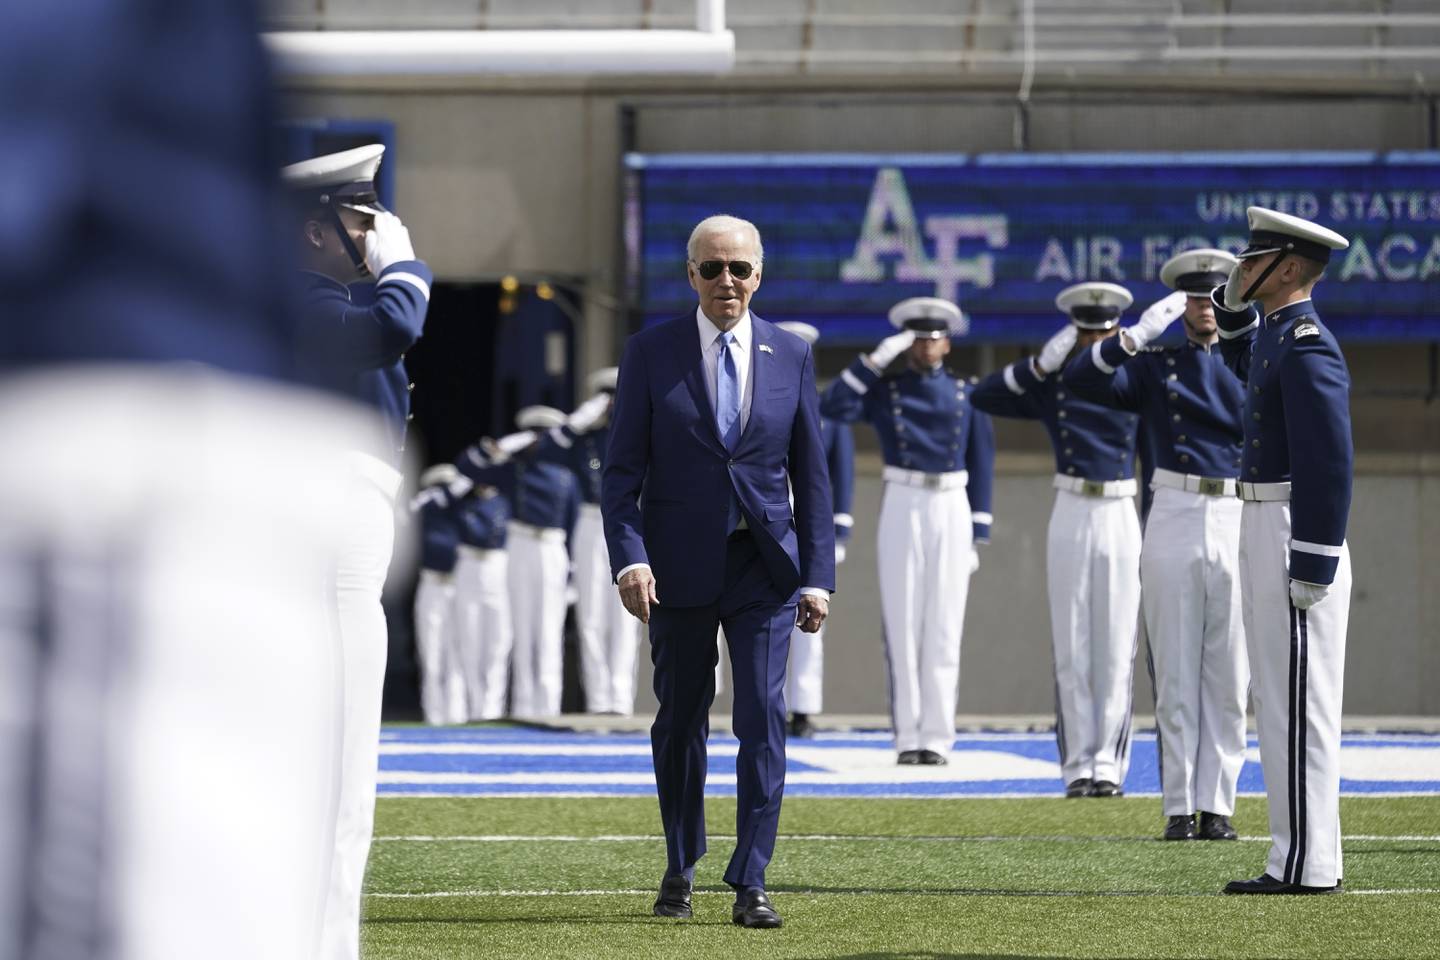 President Joe Biden arrives to the 2023 Air Force Academy Graduation Ceremony at Falcon Stadium, Thursday, June 1, 2023, at the United States Air Force Academy in Colorado Springs, Colo.